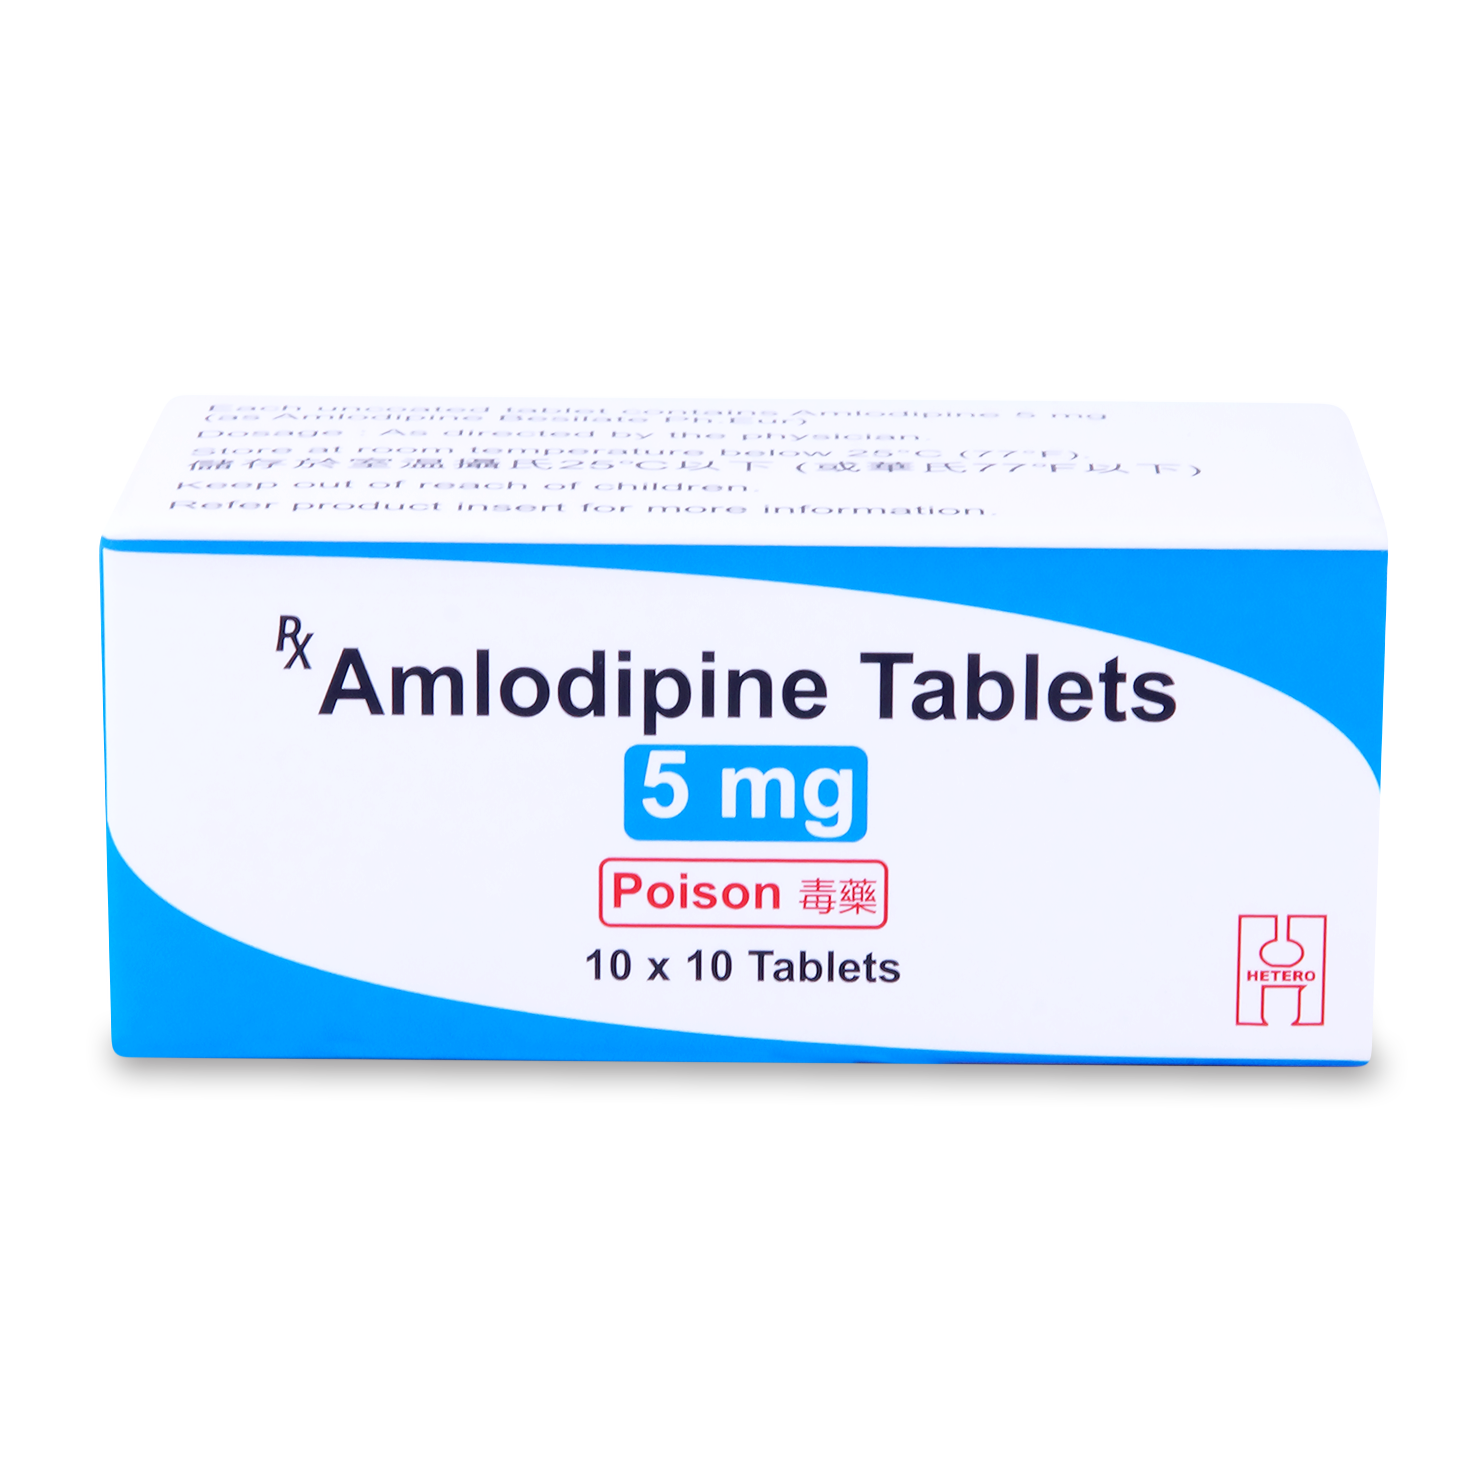 Amlodipine Tablets 5mg 10x10's (P1S1S3)